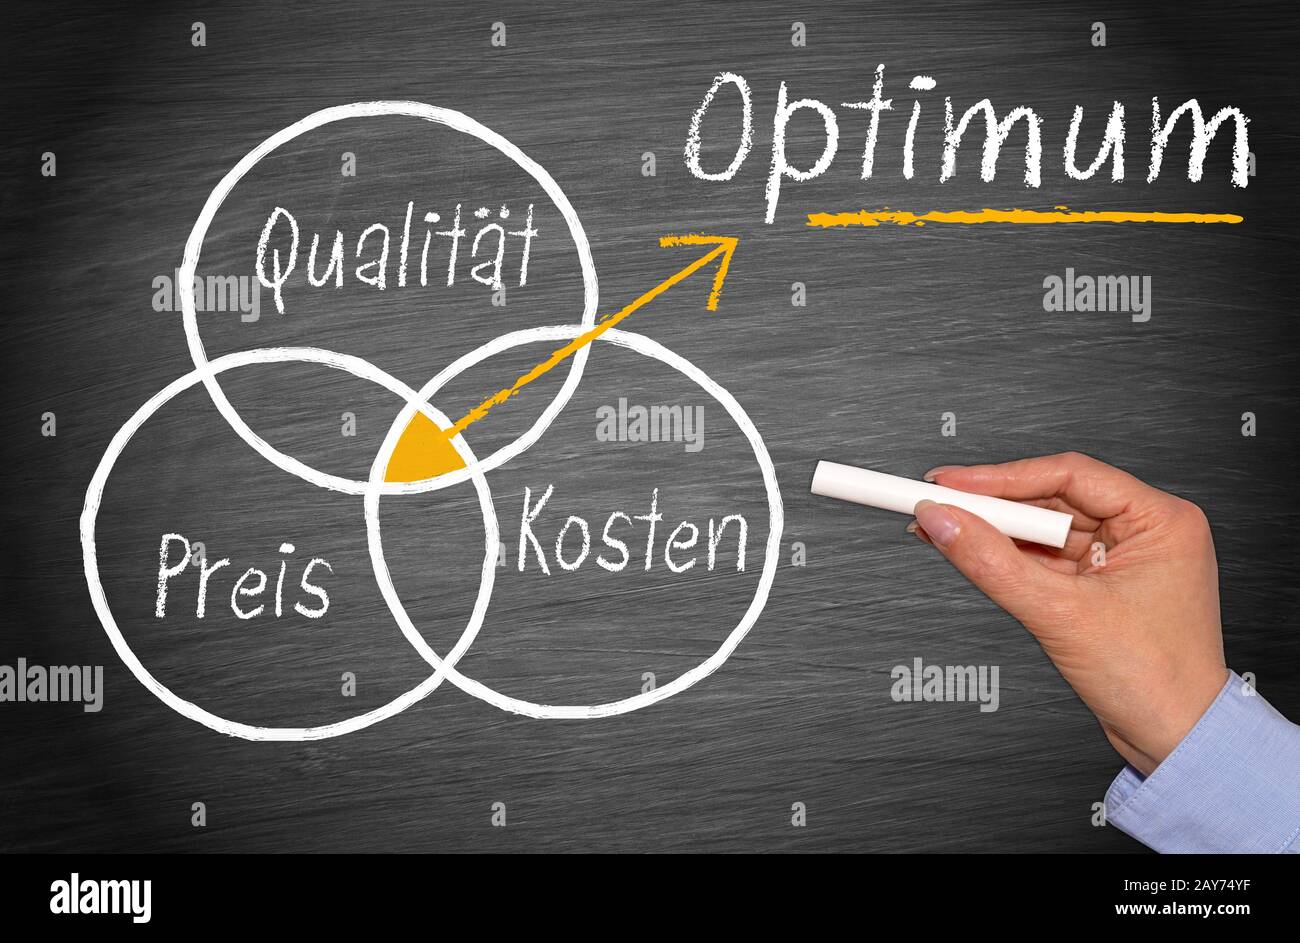 Quality, price, costs - the optimum - marketing strategy concept Stock Photo